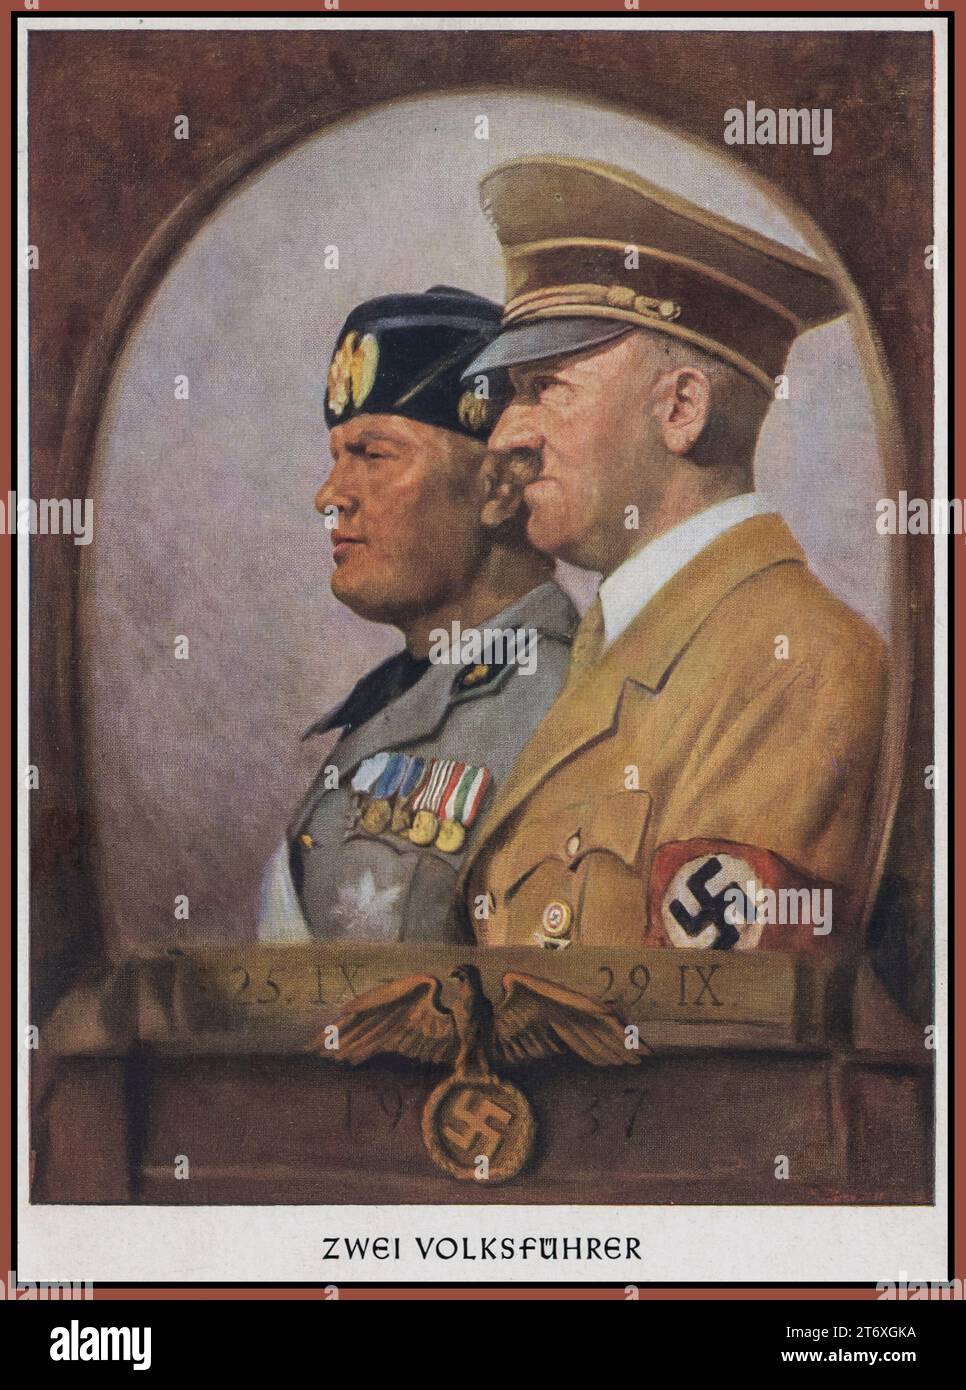 TWO LEADERS Benito Mussolini (Facist leader of Italy) and Adolf Hitler (Leader and Fuhrer of Nazi Germany) 1937 Propaganda card poster illustration Nazi Germany. ' ZWEI VOLKSFUHRER' Stock Photo